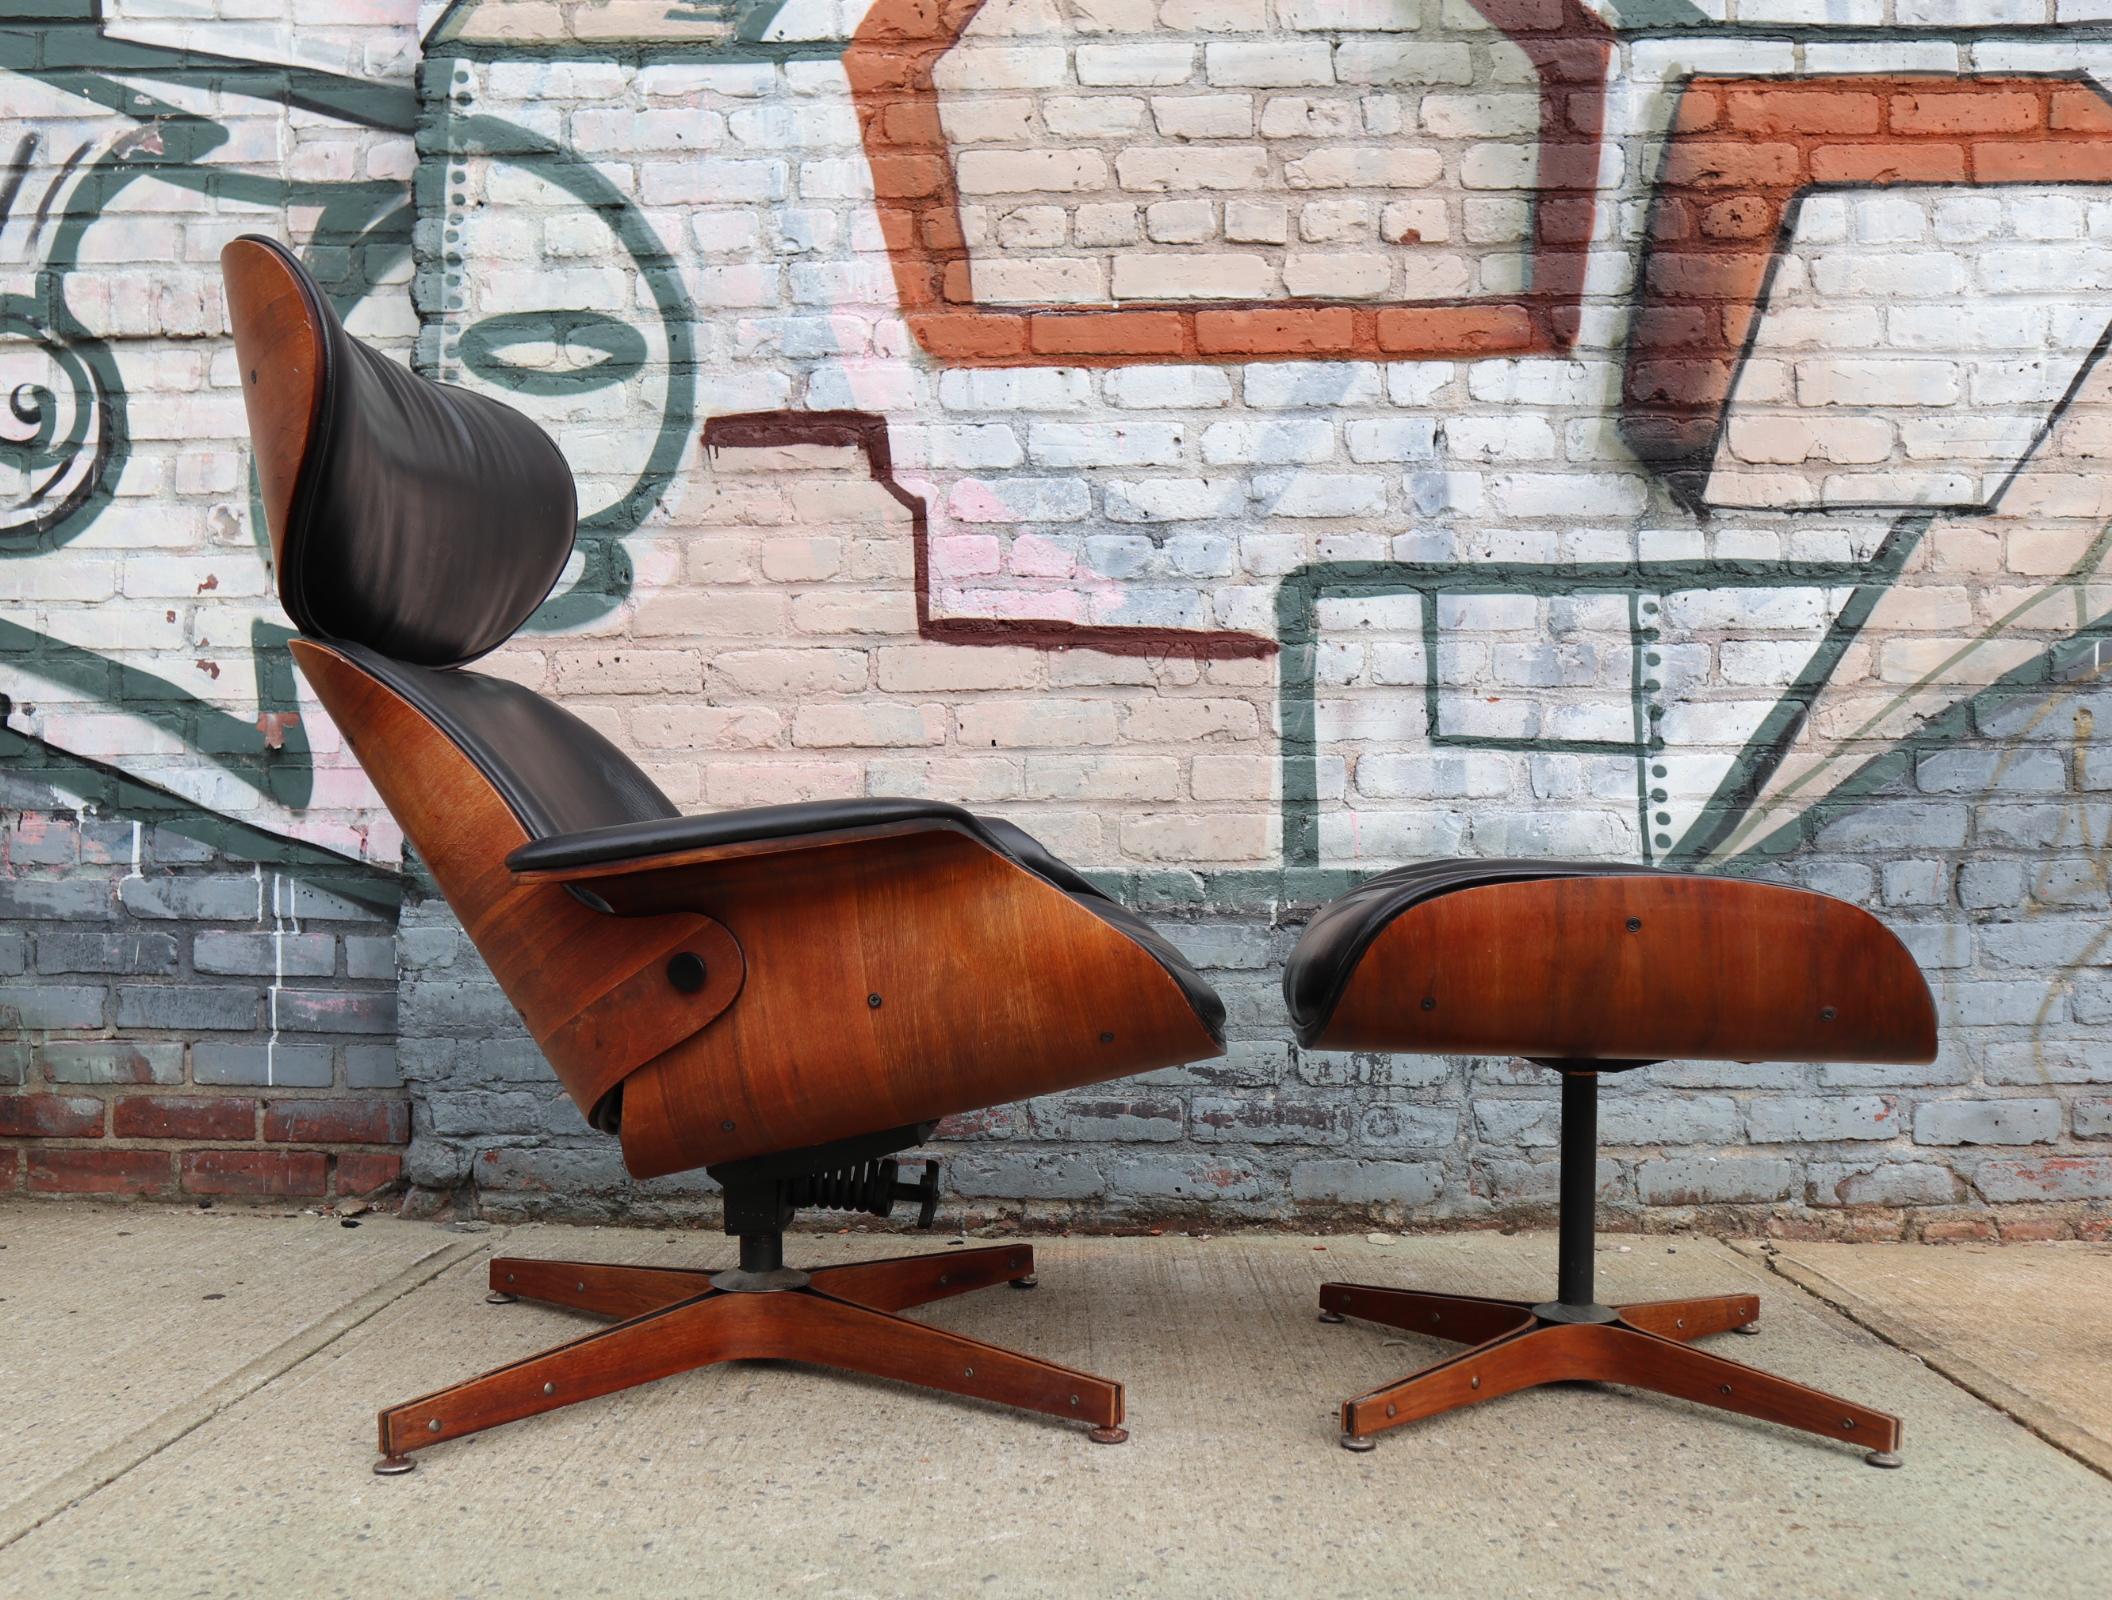 “Mr. Chair” and ottoman designed by George Mulhauser for Plycraft. Circa 1960s.original naugahyde upholstery in very good condition with no holes or tears. Tilting swive functions smoothly and ottoman swivels smoothly. Original walnut framed and